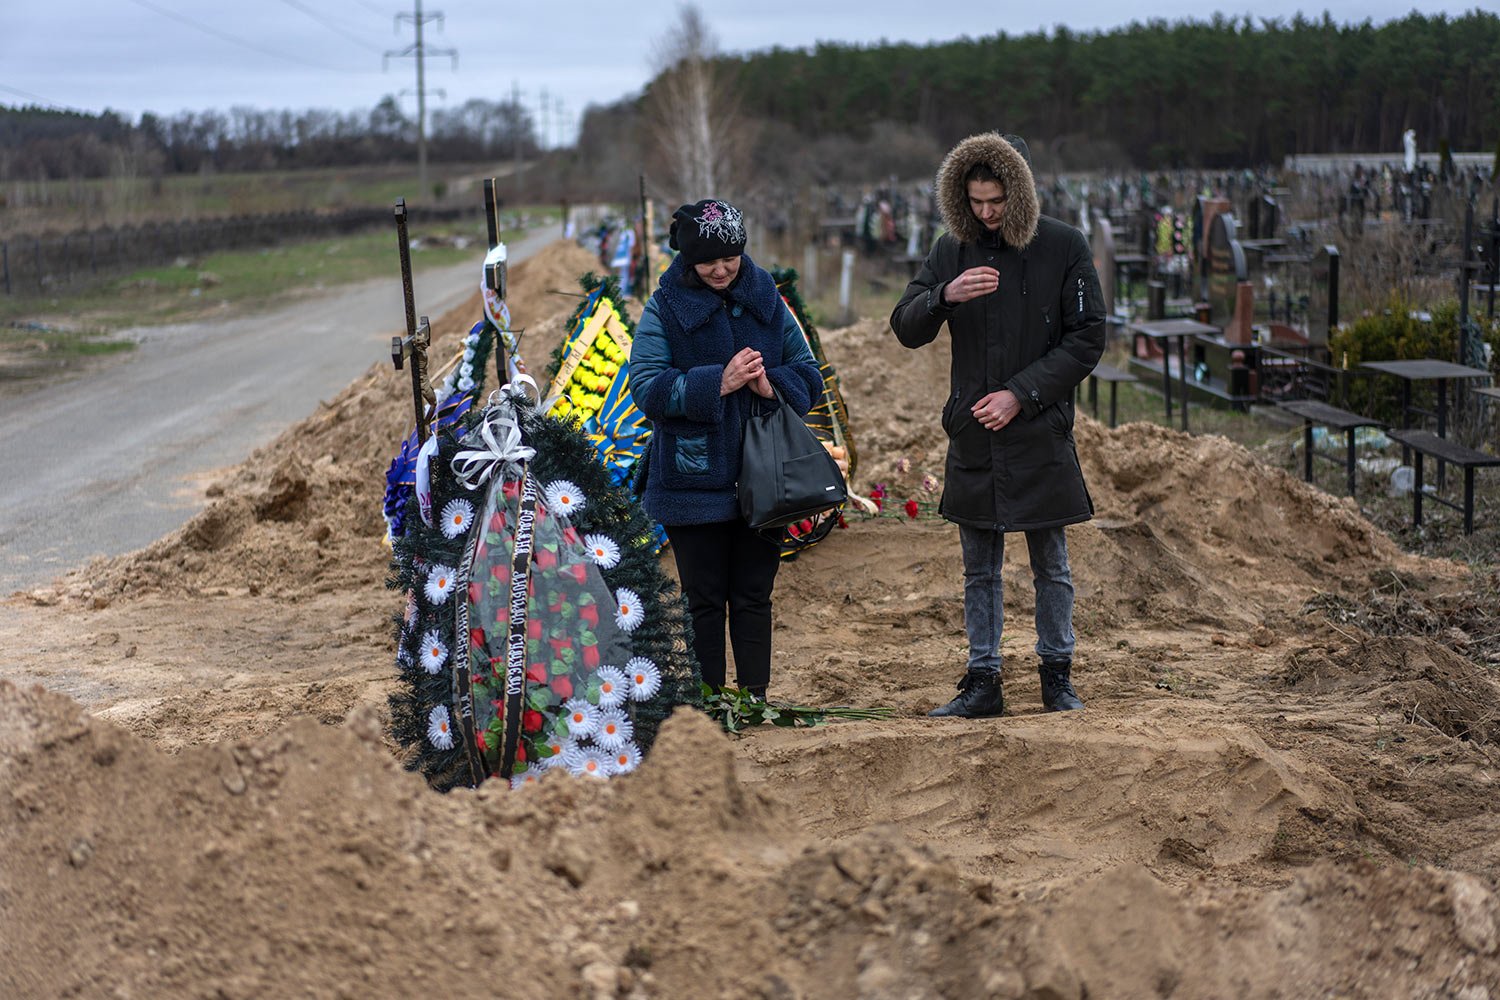  Natalya Verbova, 49, and her son Roman Verbovyi, 23, attend the funeral of her husband Andriy Verbovyi, 55, who was killed by Russian soldiers while in the territorial defense in Bucha on the outskirts of Kyiv, Ukraine, Wednesday , April 13, 2022. (